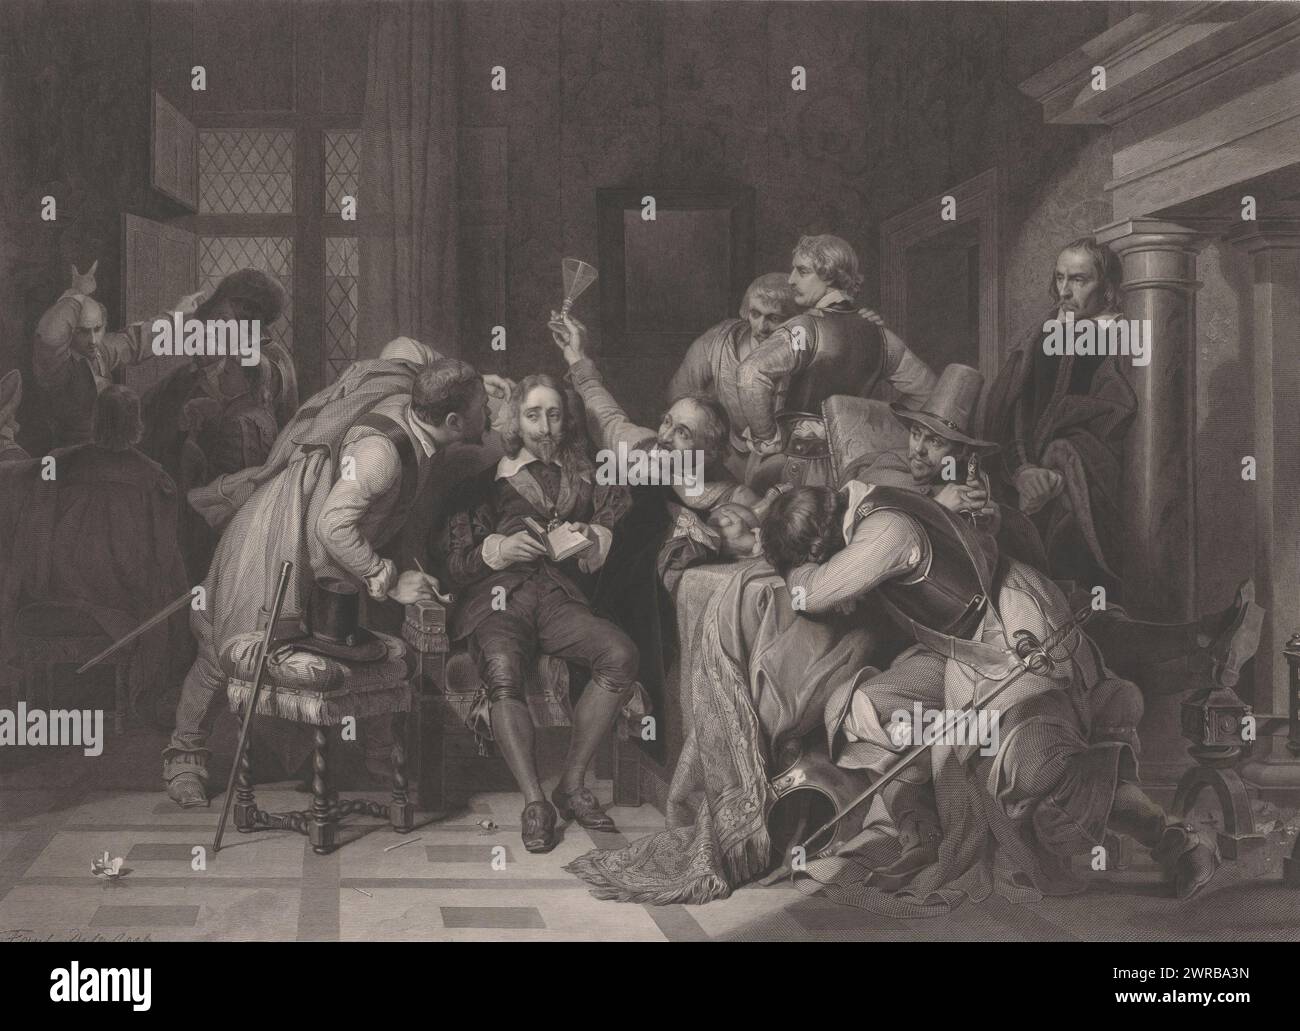 Interior with a reading man among drunken figures, print maker: Achille Louis Martinet, after painting by: Paul Delaroche, printer: Bougeard, Paris, 1816 - 1877, paper, steel engraving, height 466 mm × width 587 mm, print Stock Photo